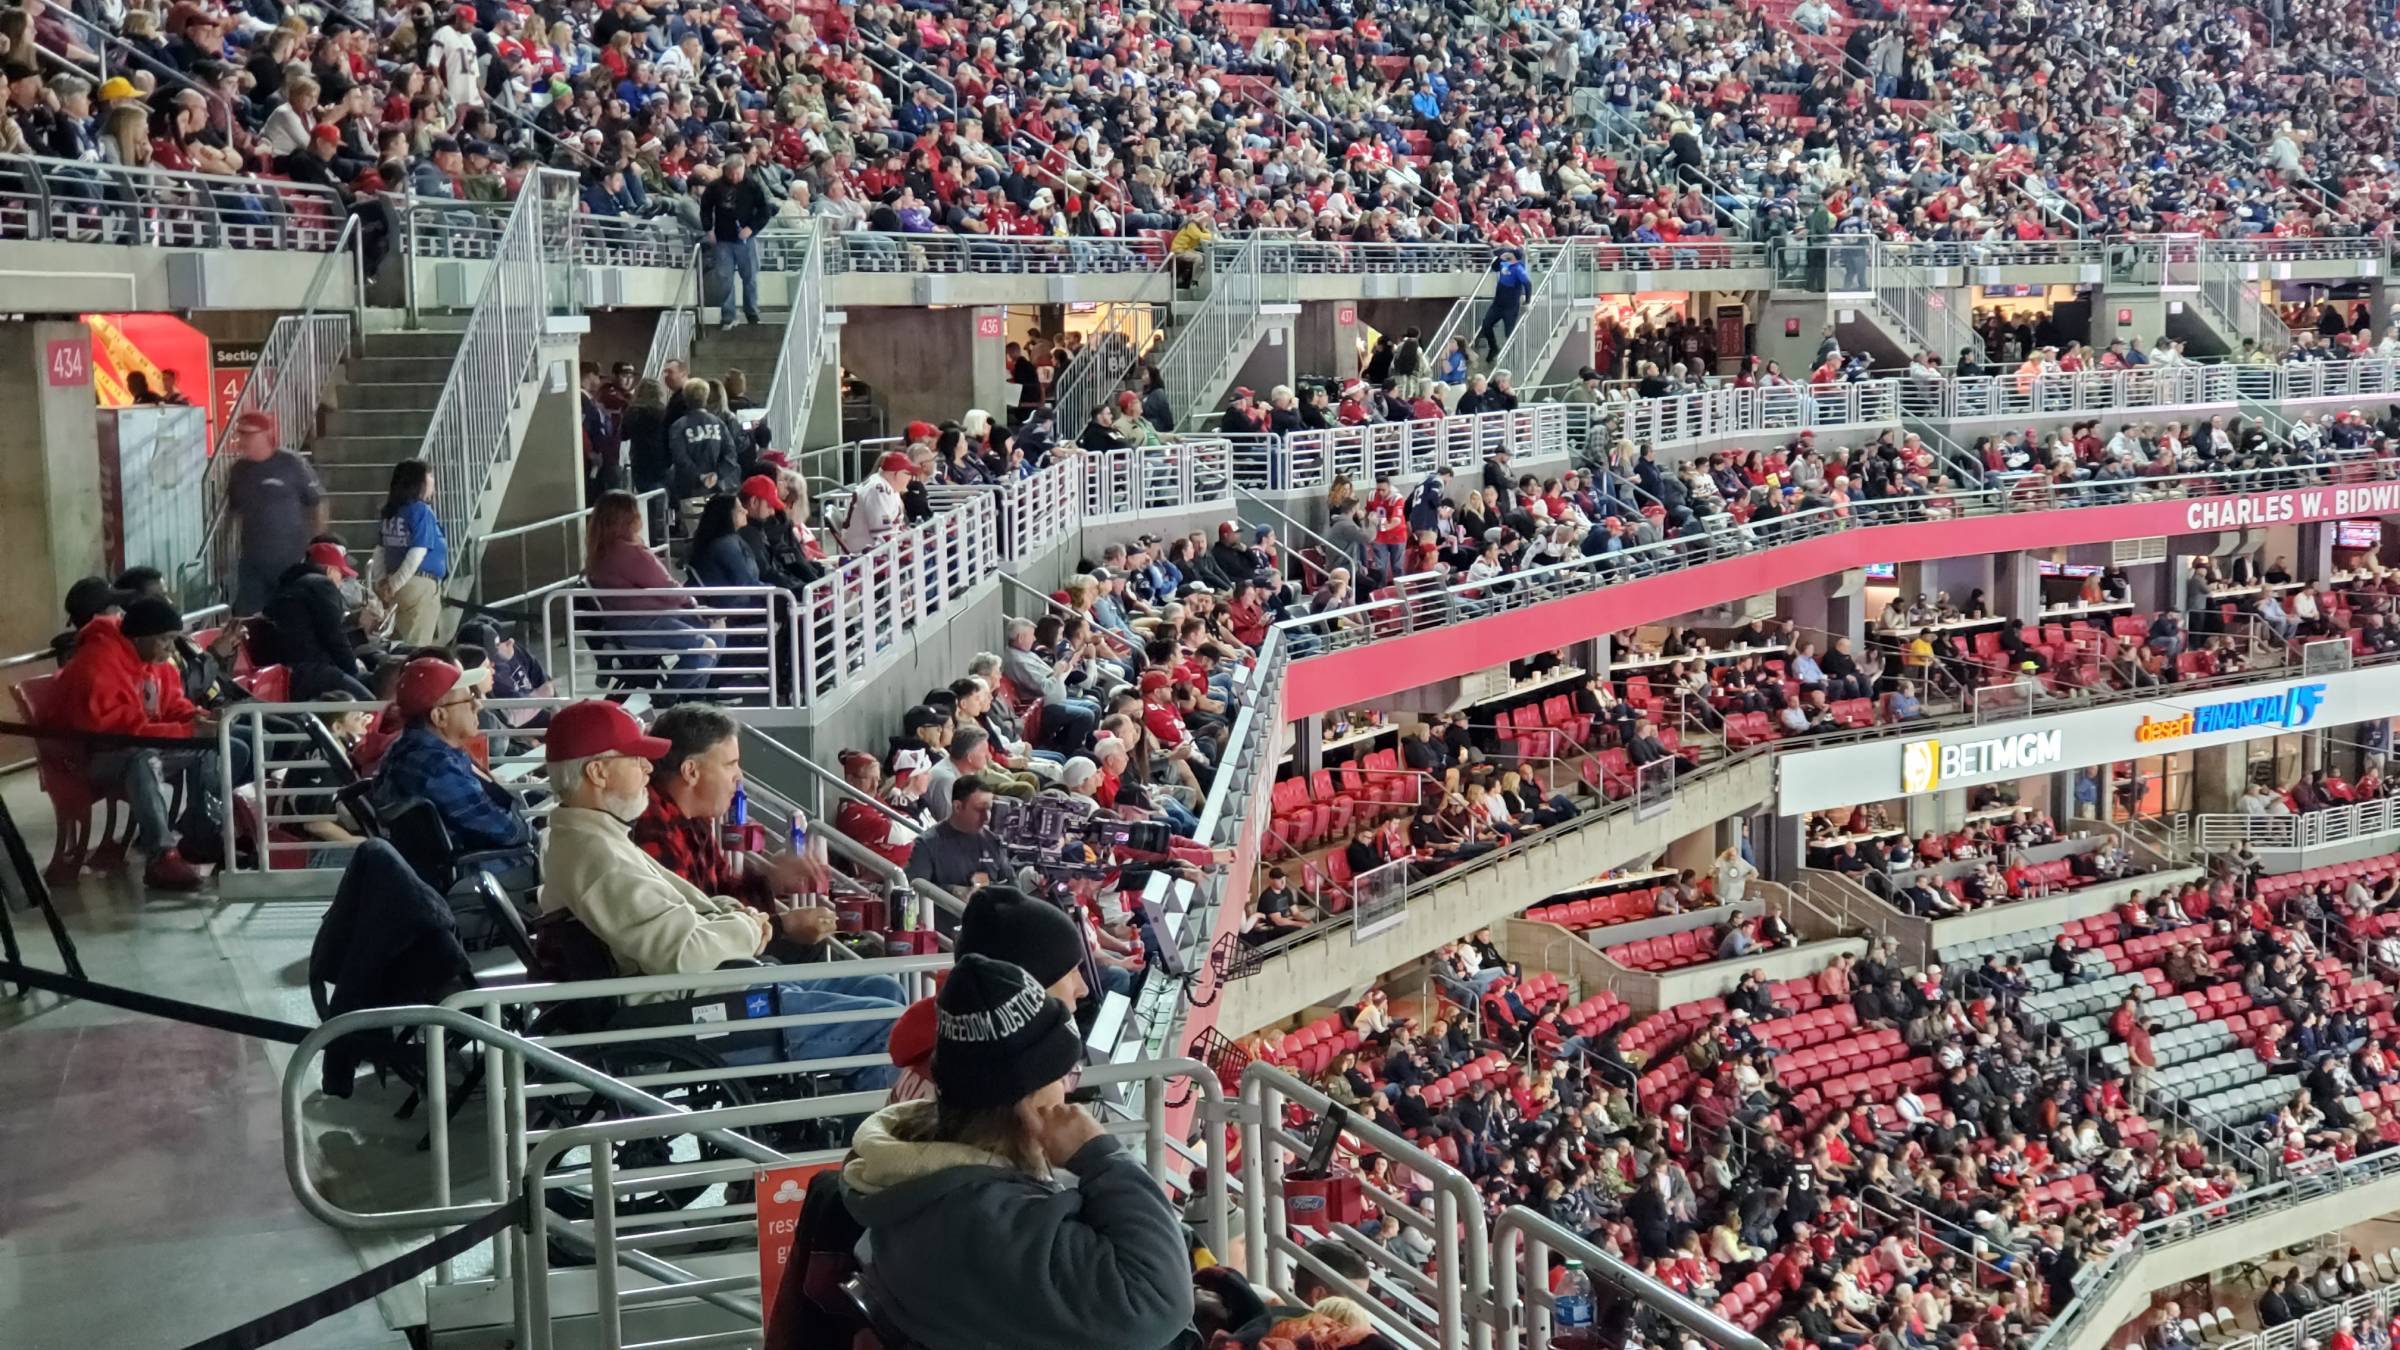 Section 422 at State Farm Stadium